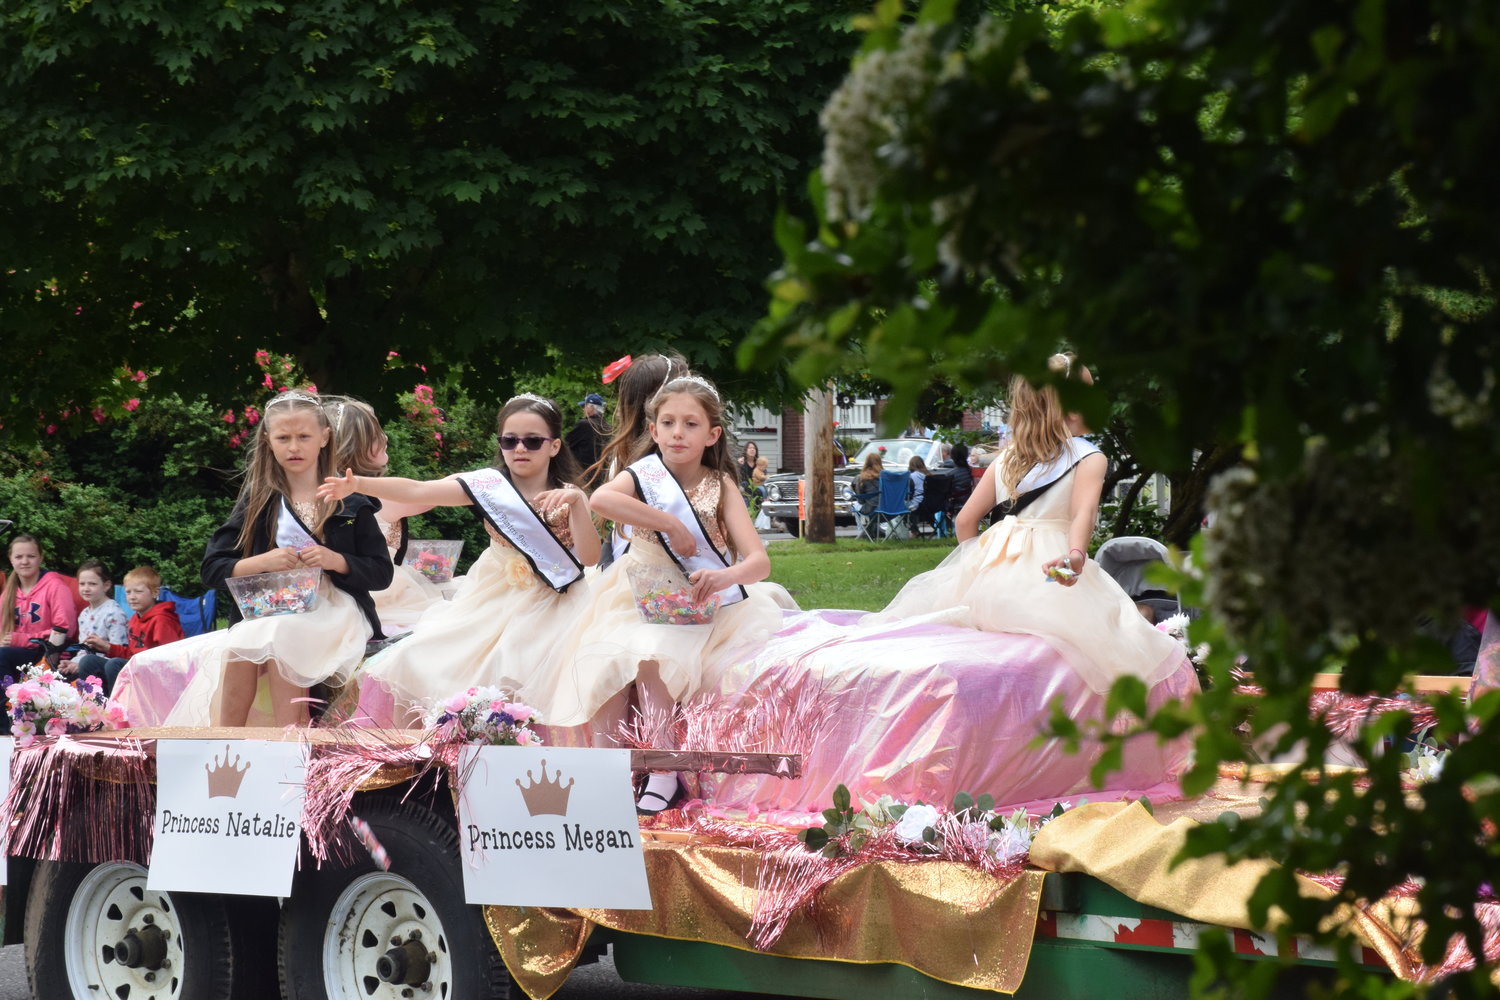 Members of Woodland Planters Days Royalty wave during the celebration’s parade on June 18.